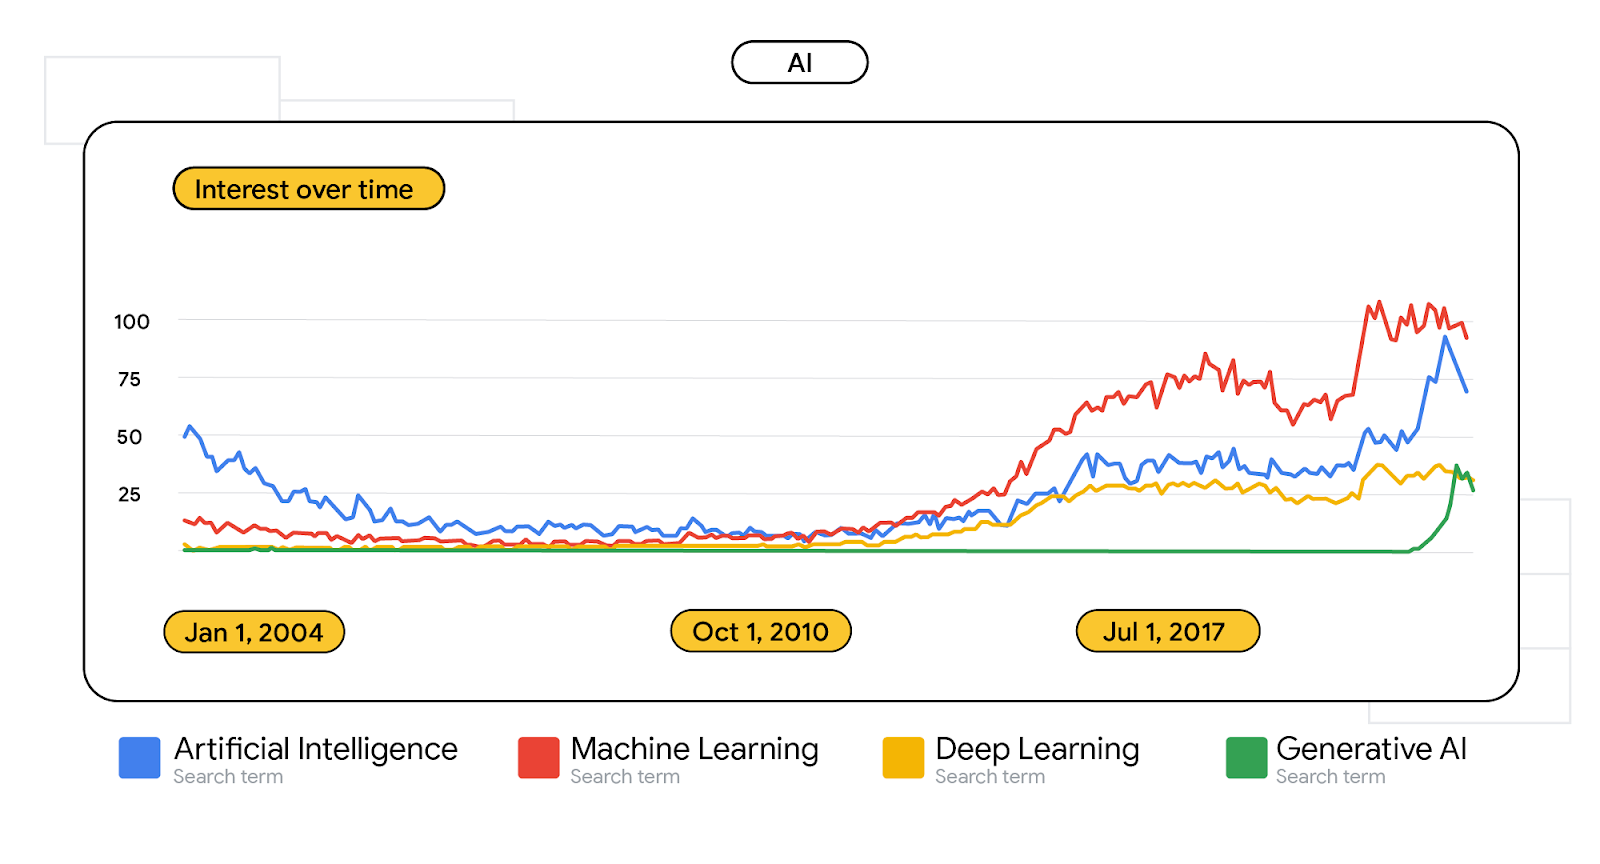 Graph of search term volume for “artificial intelligence”, “machine learning”, “deep learning”, and “generative AI” from 2004-present day